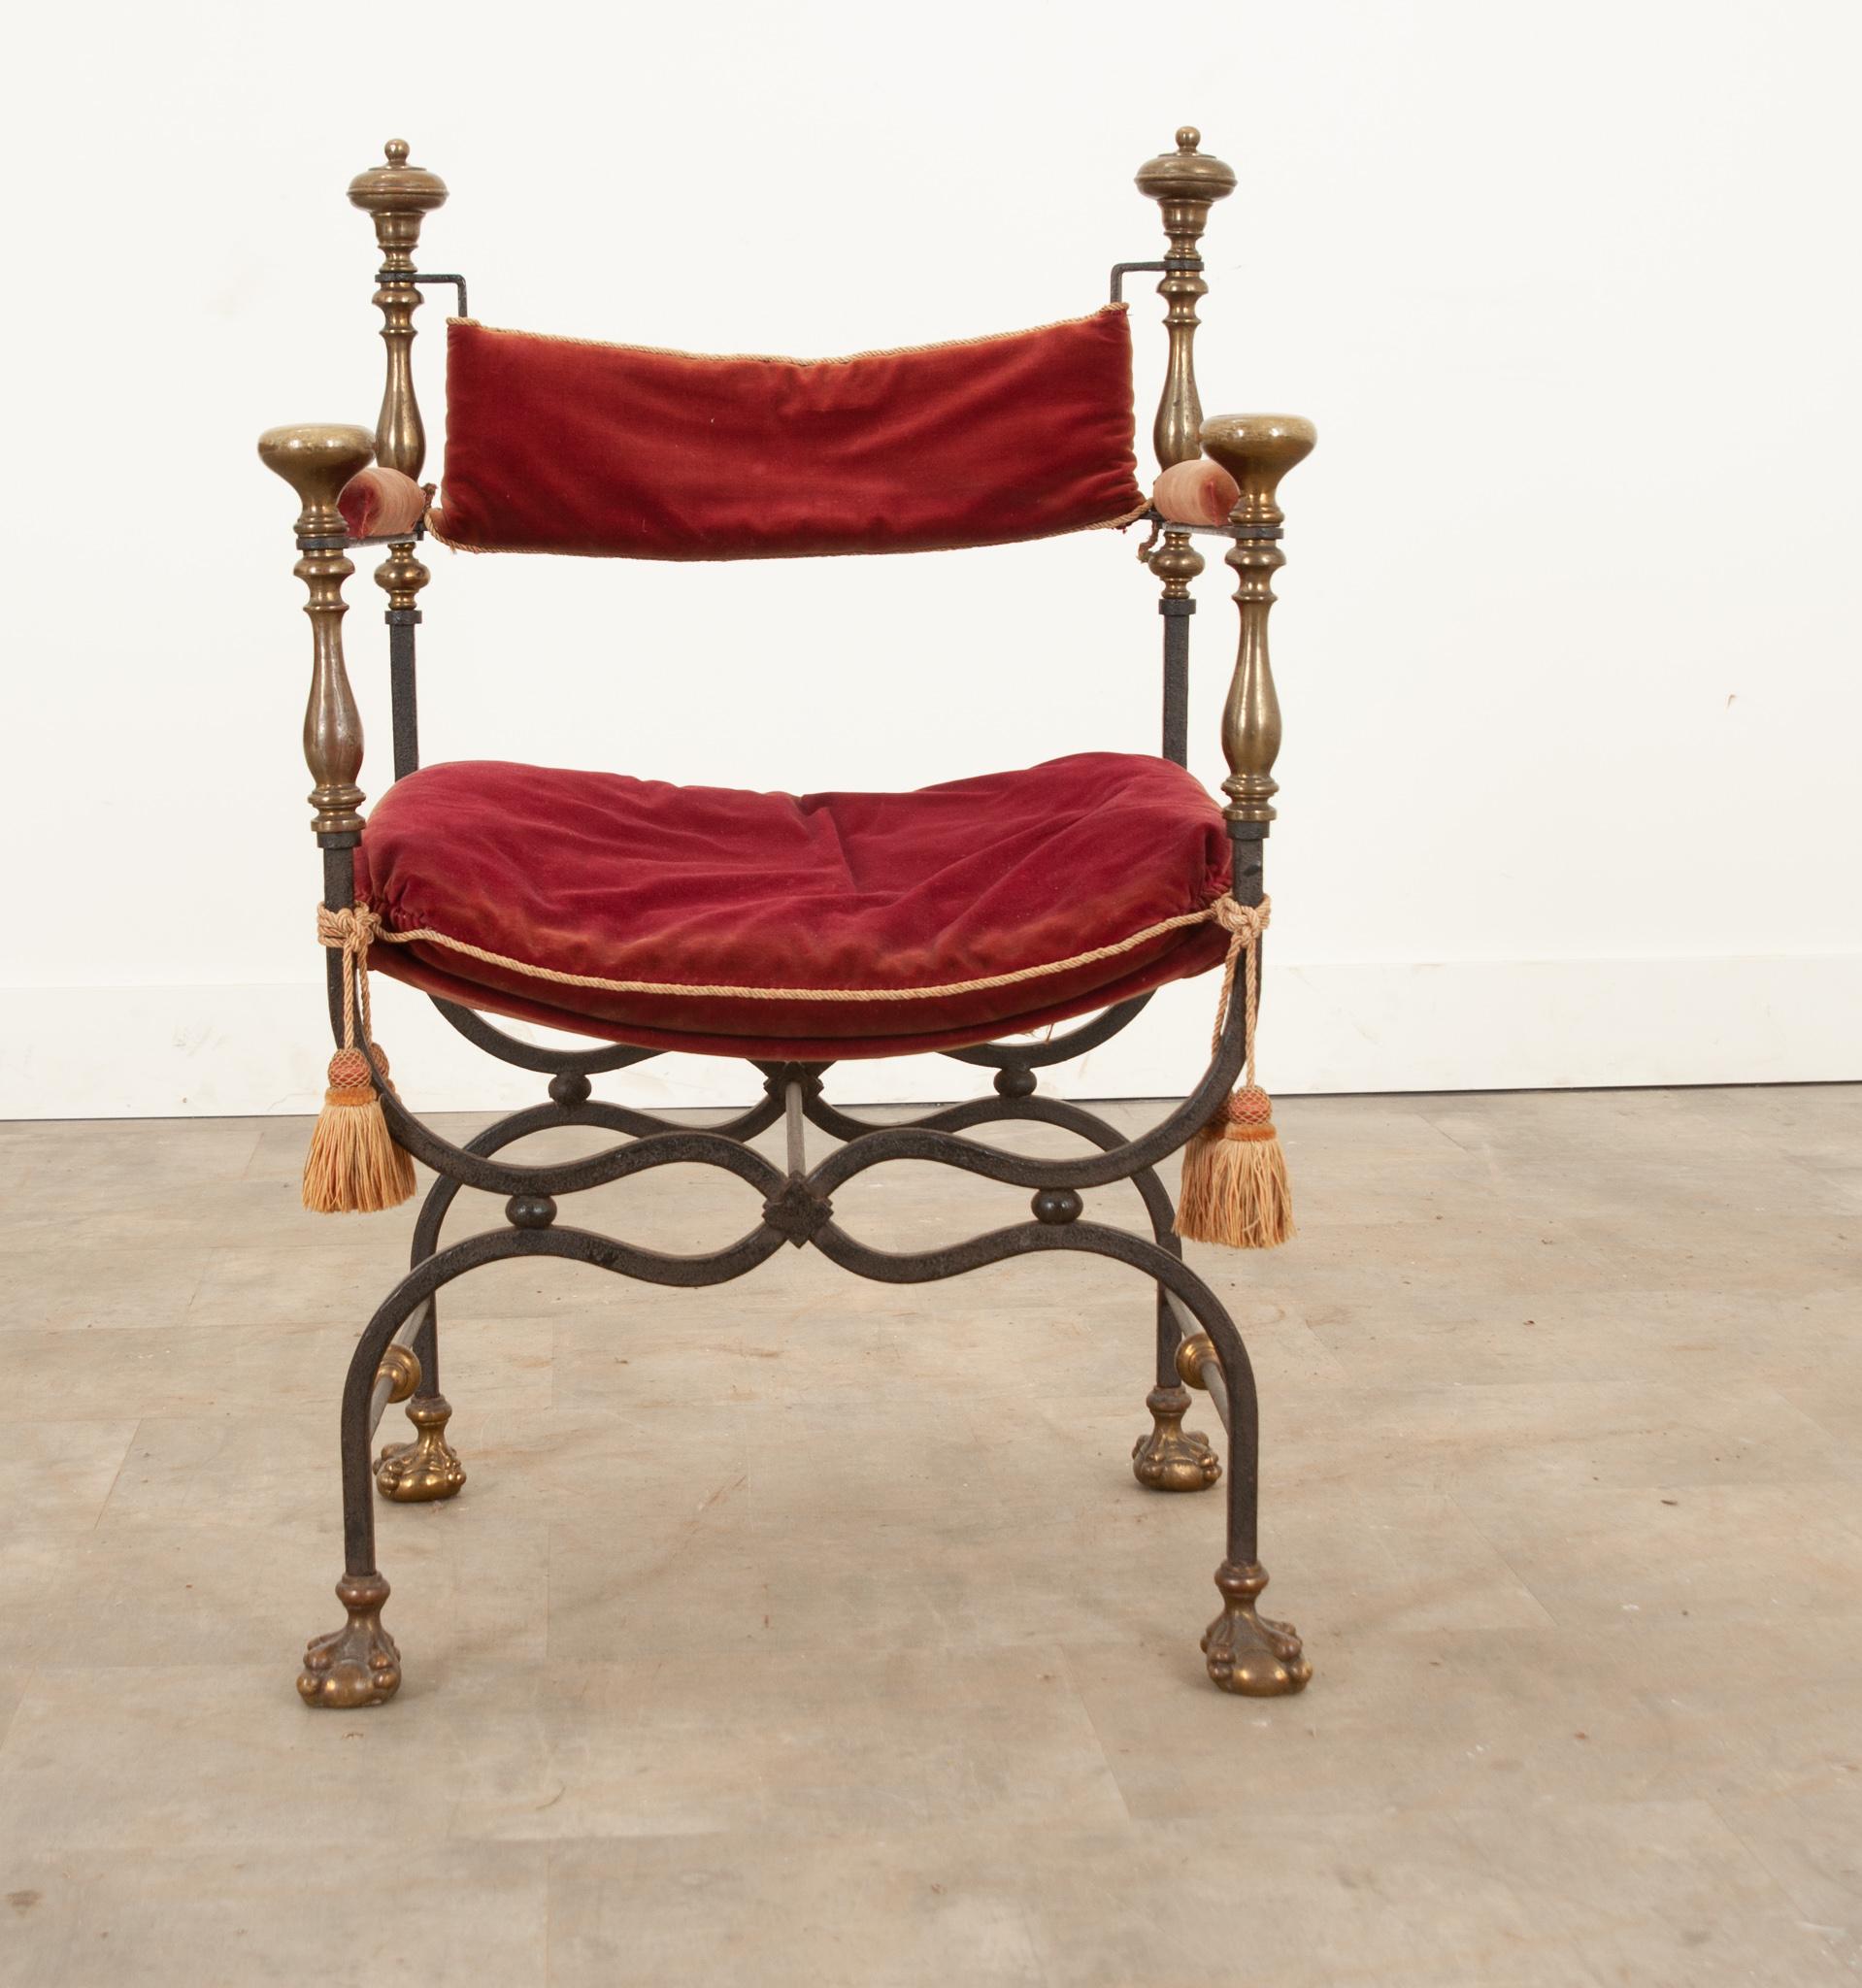 A fabulous Savonarola chair with perfectly worn red velvet cushions with quality tassel ties. Decorative brass finials contrast the hand forged iron frames beautifully. The bottom and arm cushion contains the original mohair filling and remains